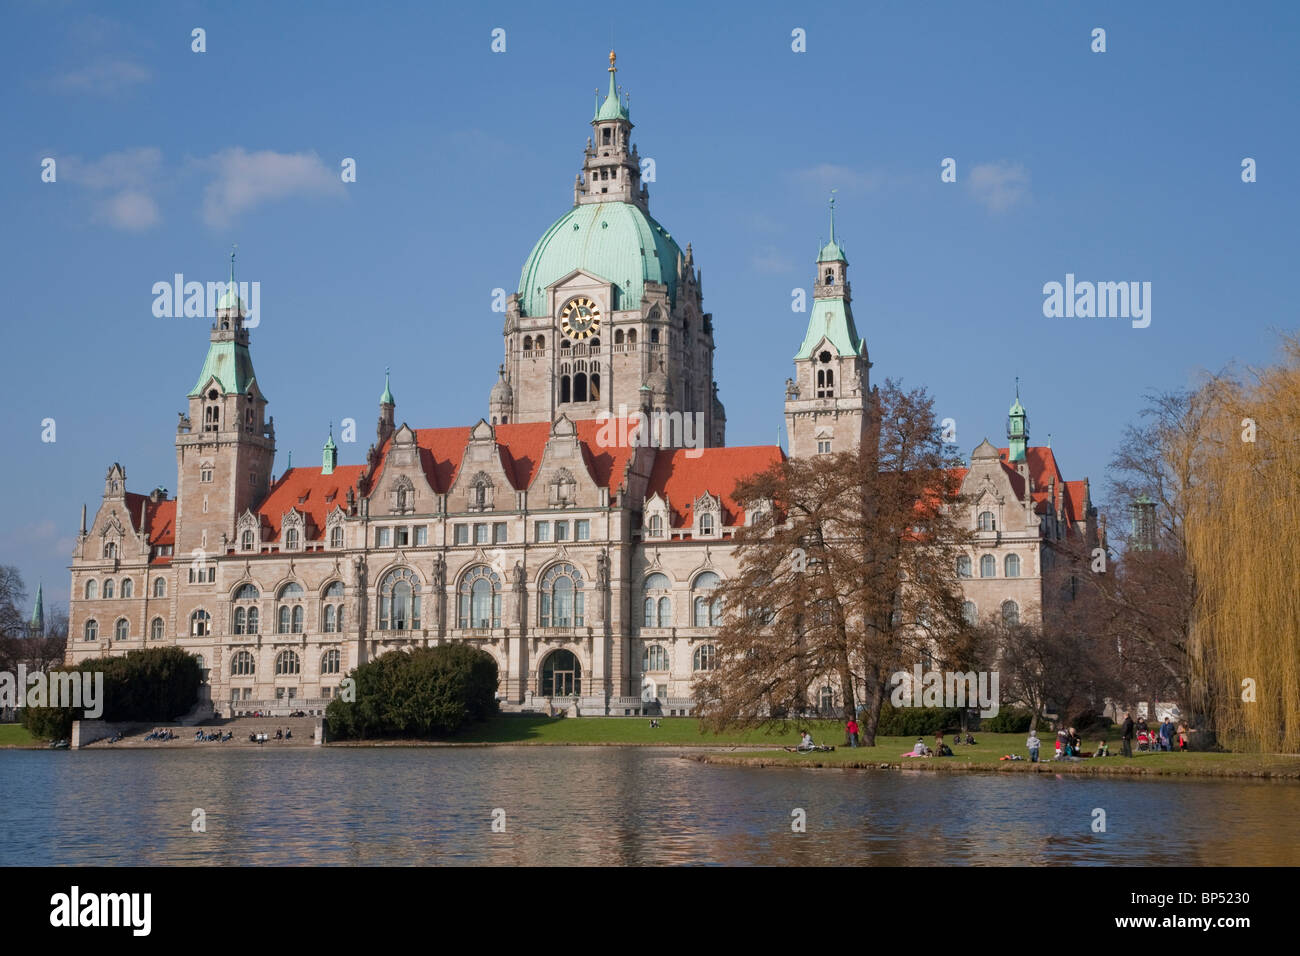 MASCHTEICH POND IN FRONT OF THE NEW TOWN HALL BUILDING, MASCHPARK PARK, HANOVER, LOWER SAXONY, GERMANY Stock Photo